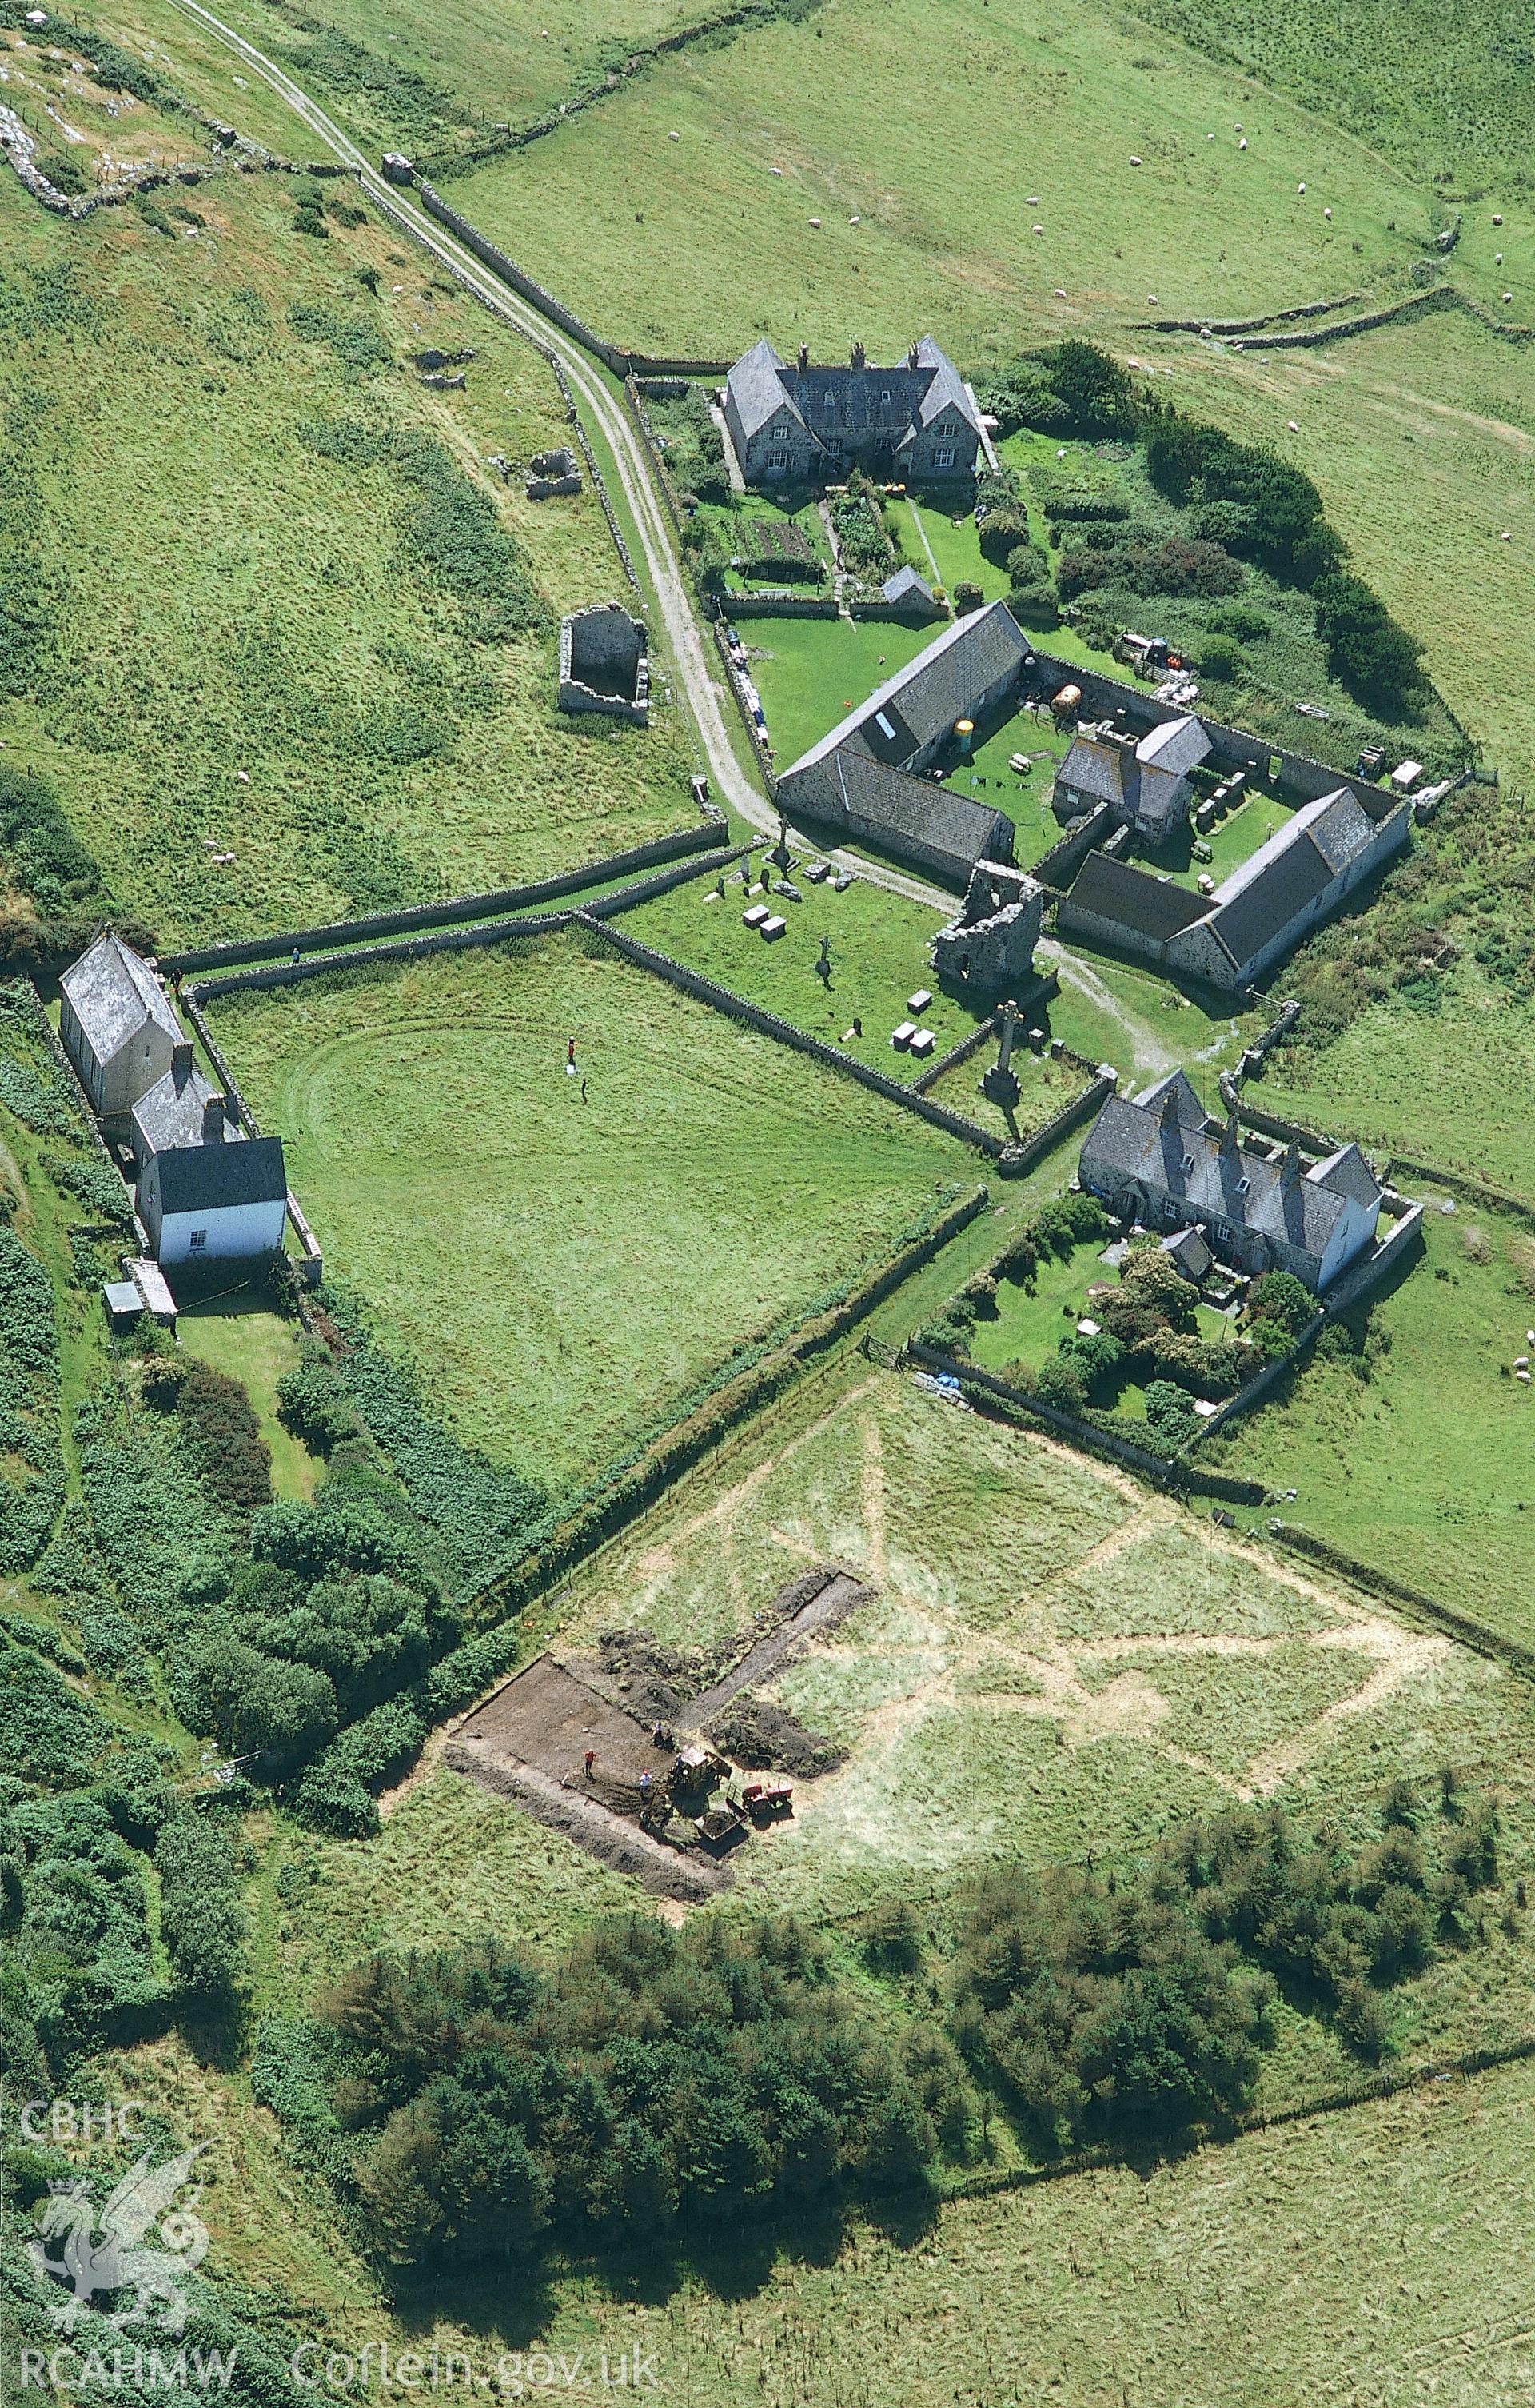 RCAHMW colour oblique aerial photograph of St Mary's Abbey, Bardsey island taken on 15/08/2002 by Toby Driver